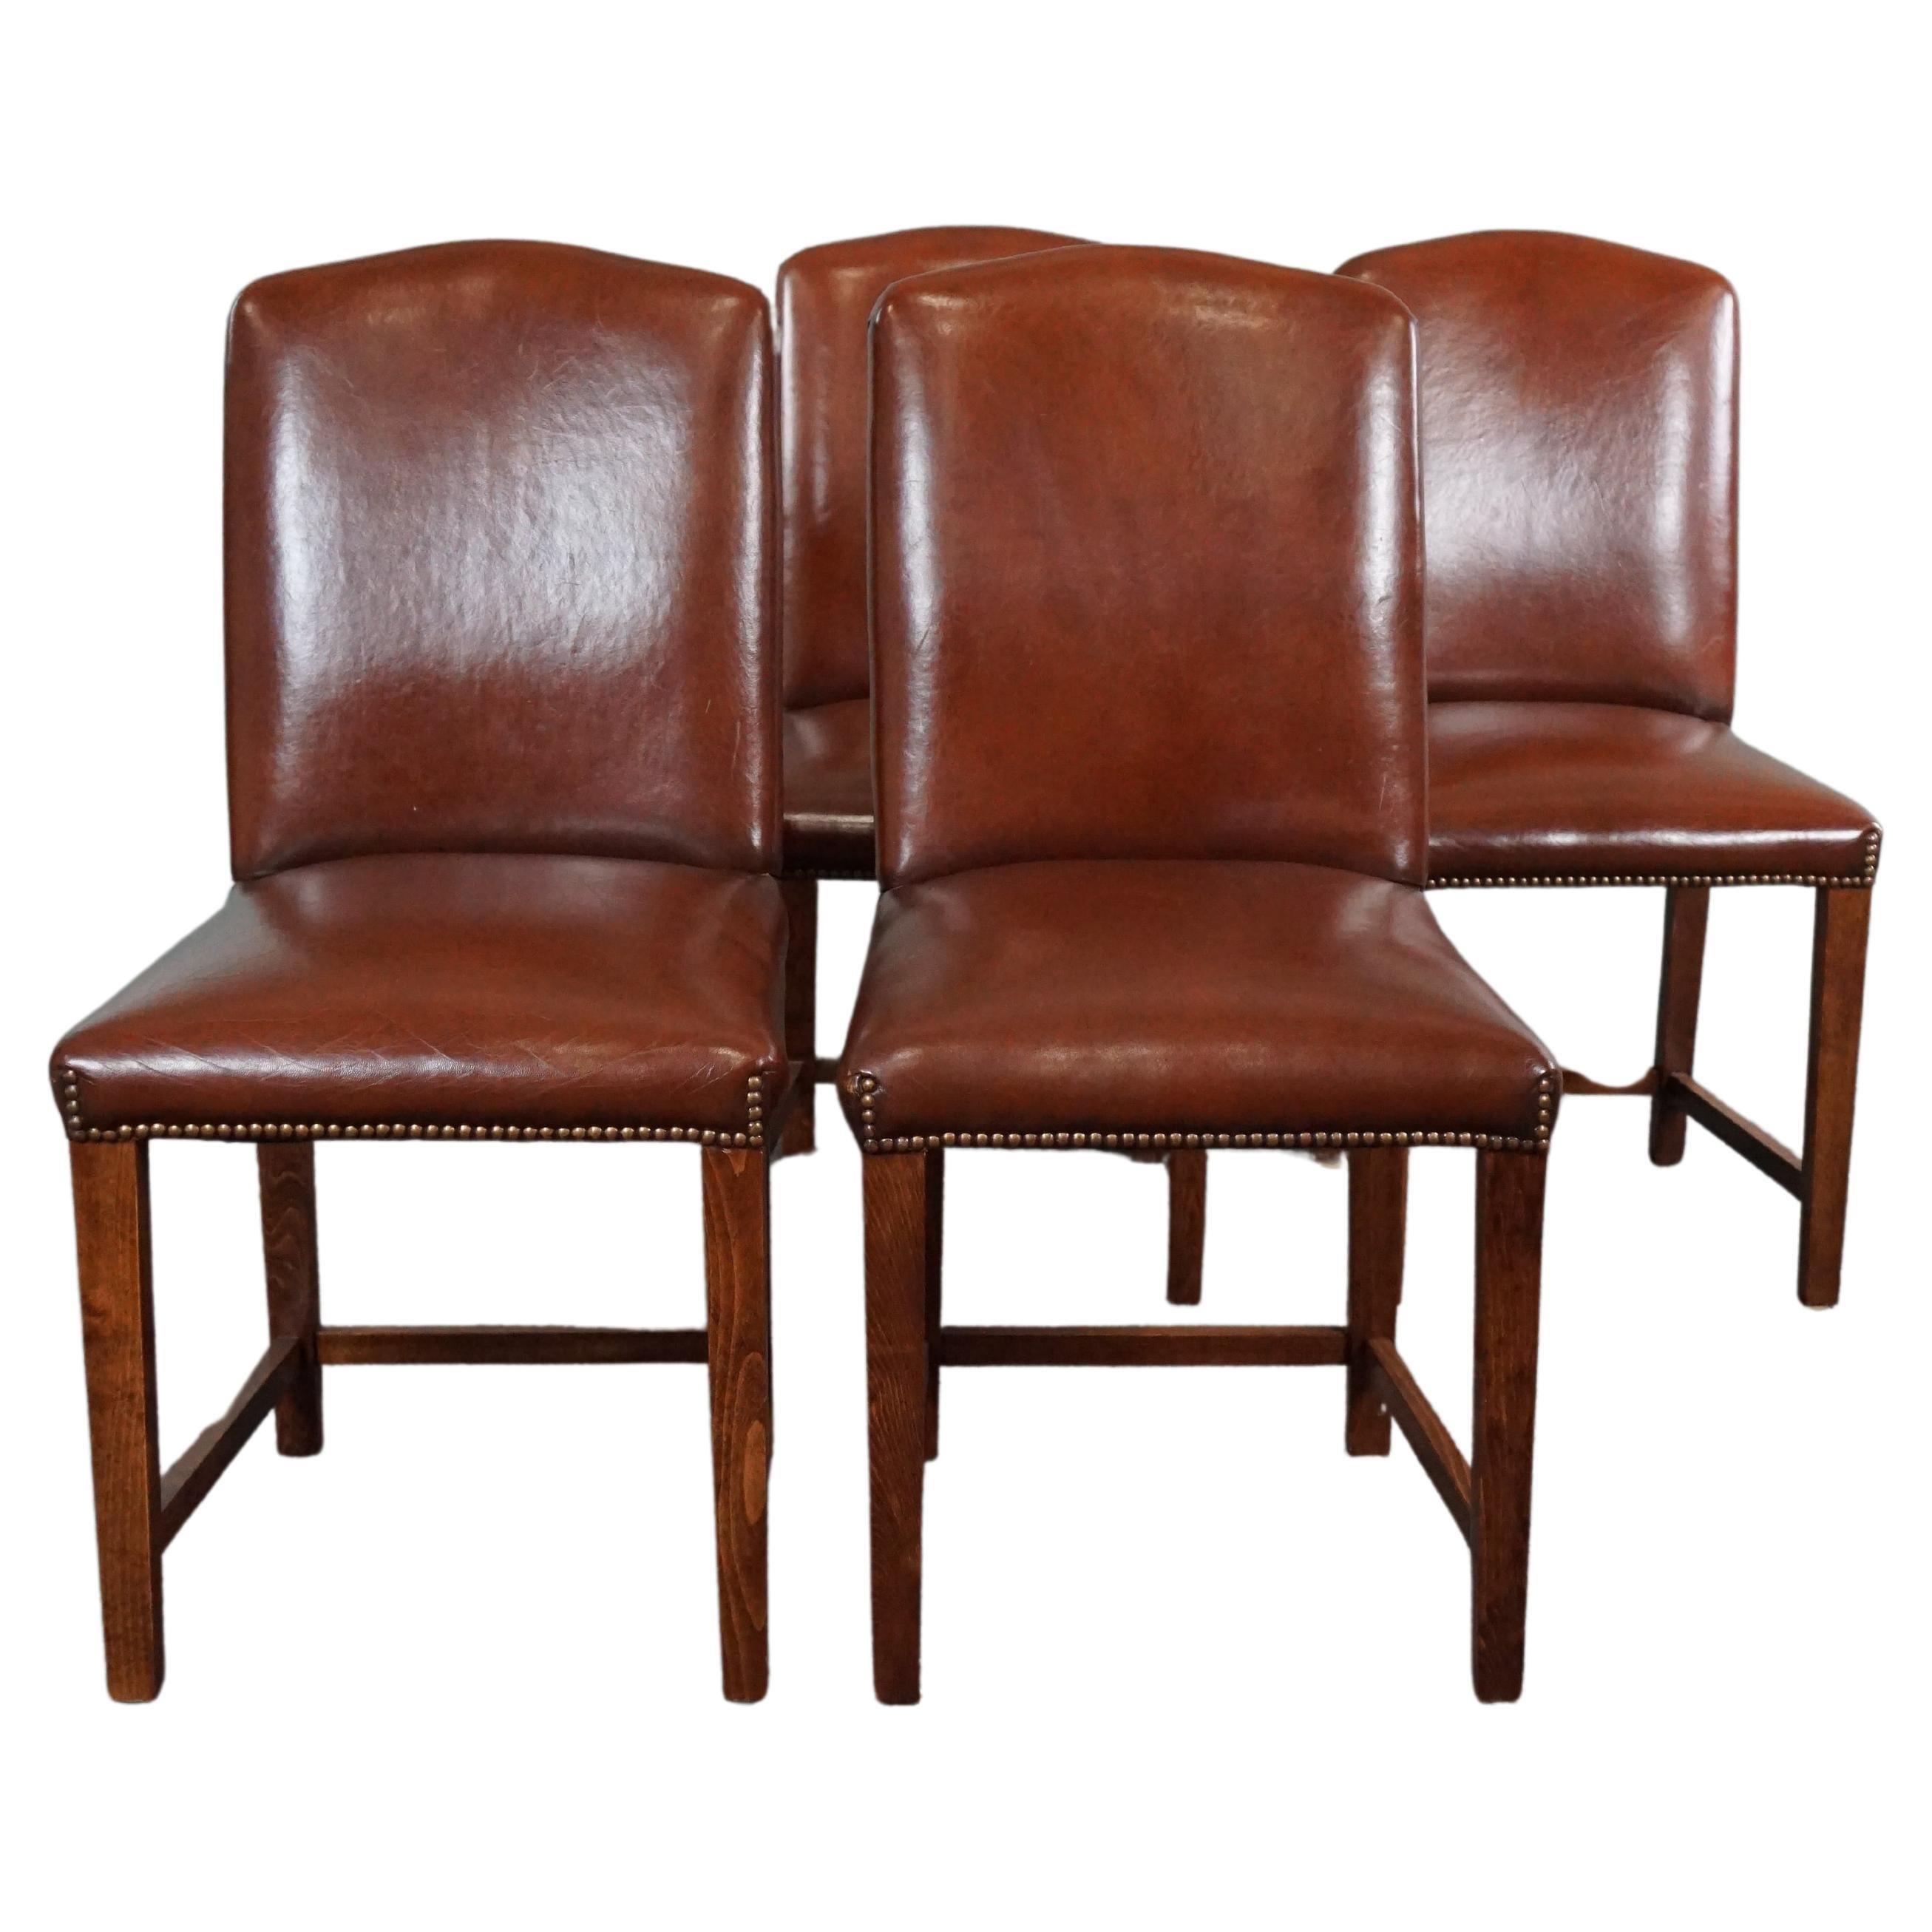 Solid set of 4 sheep leather dining room chairs For Sale